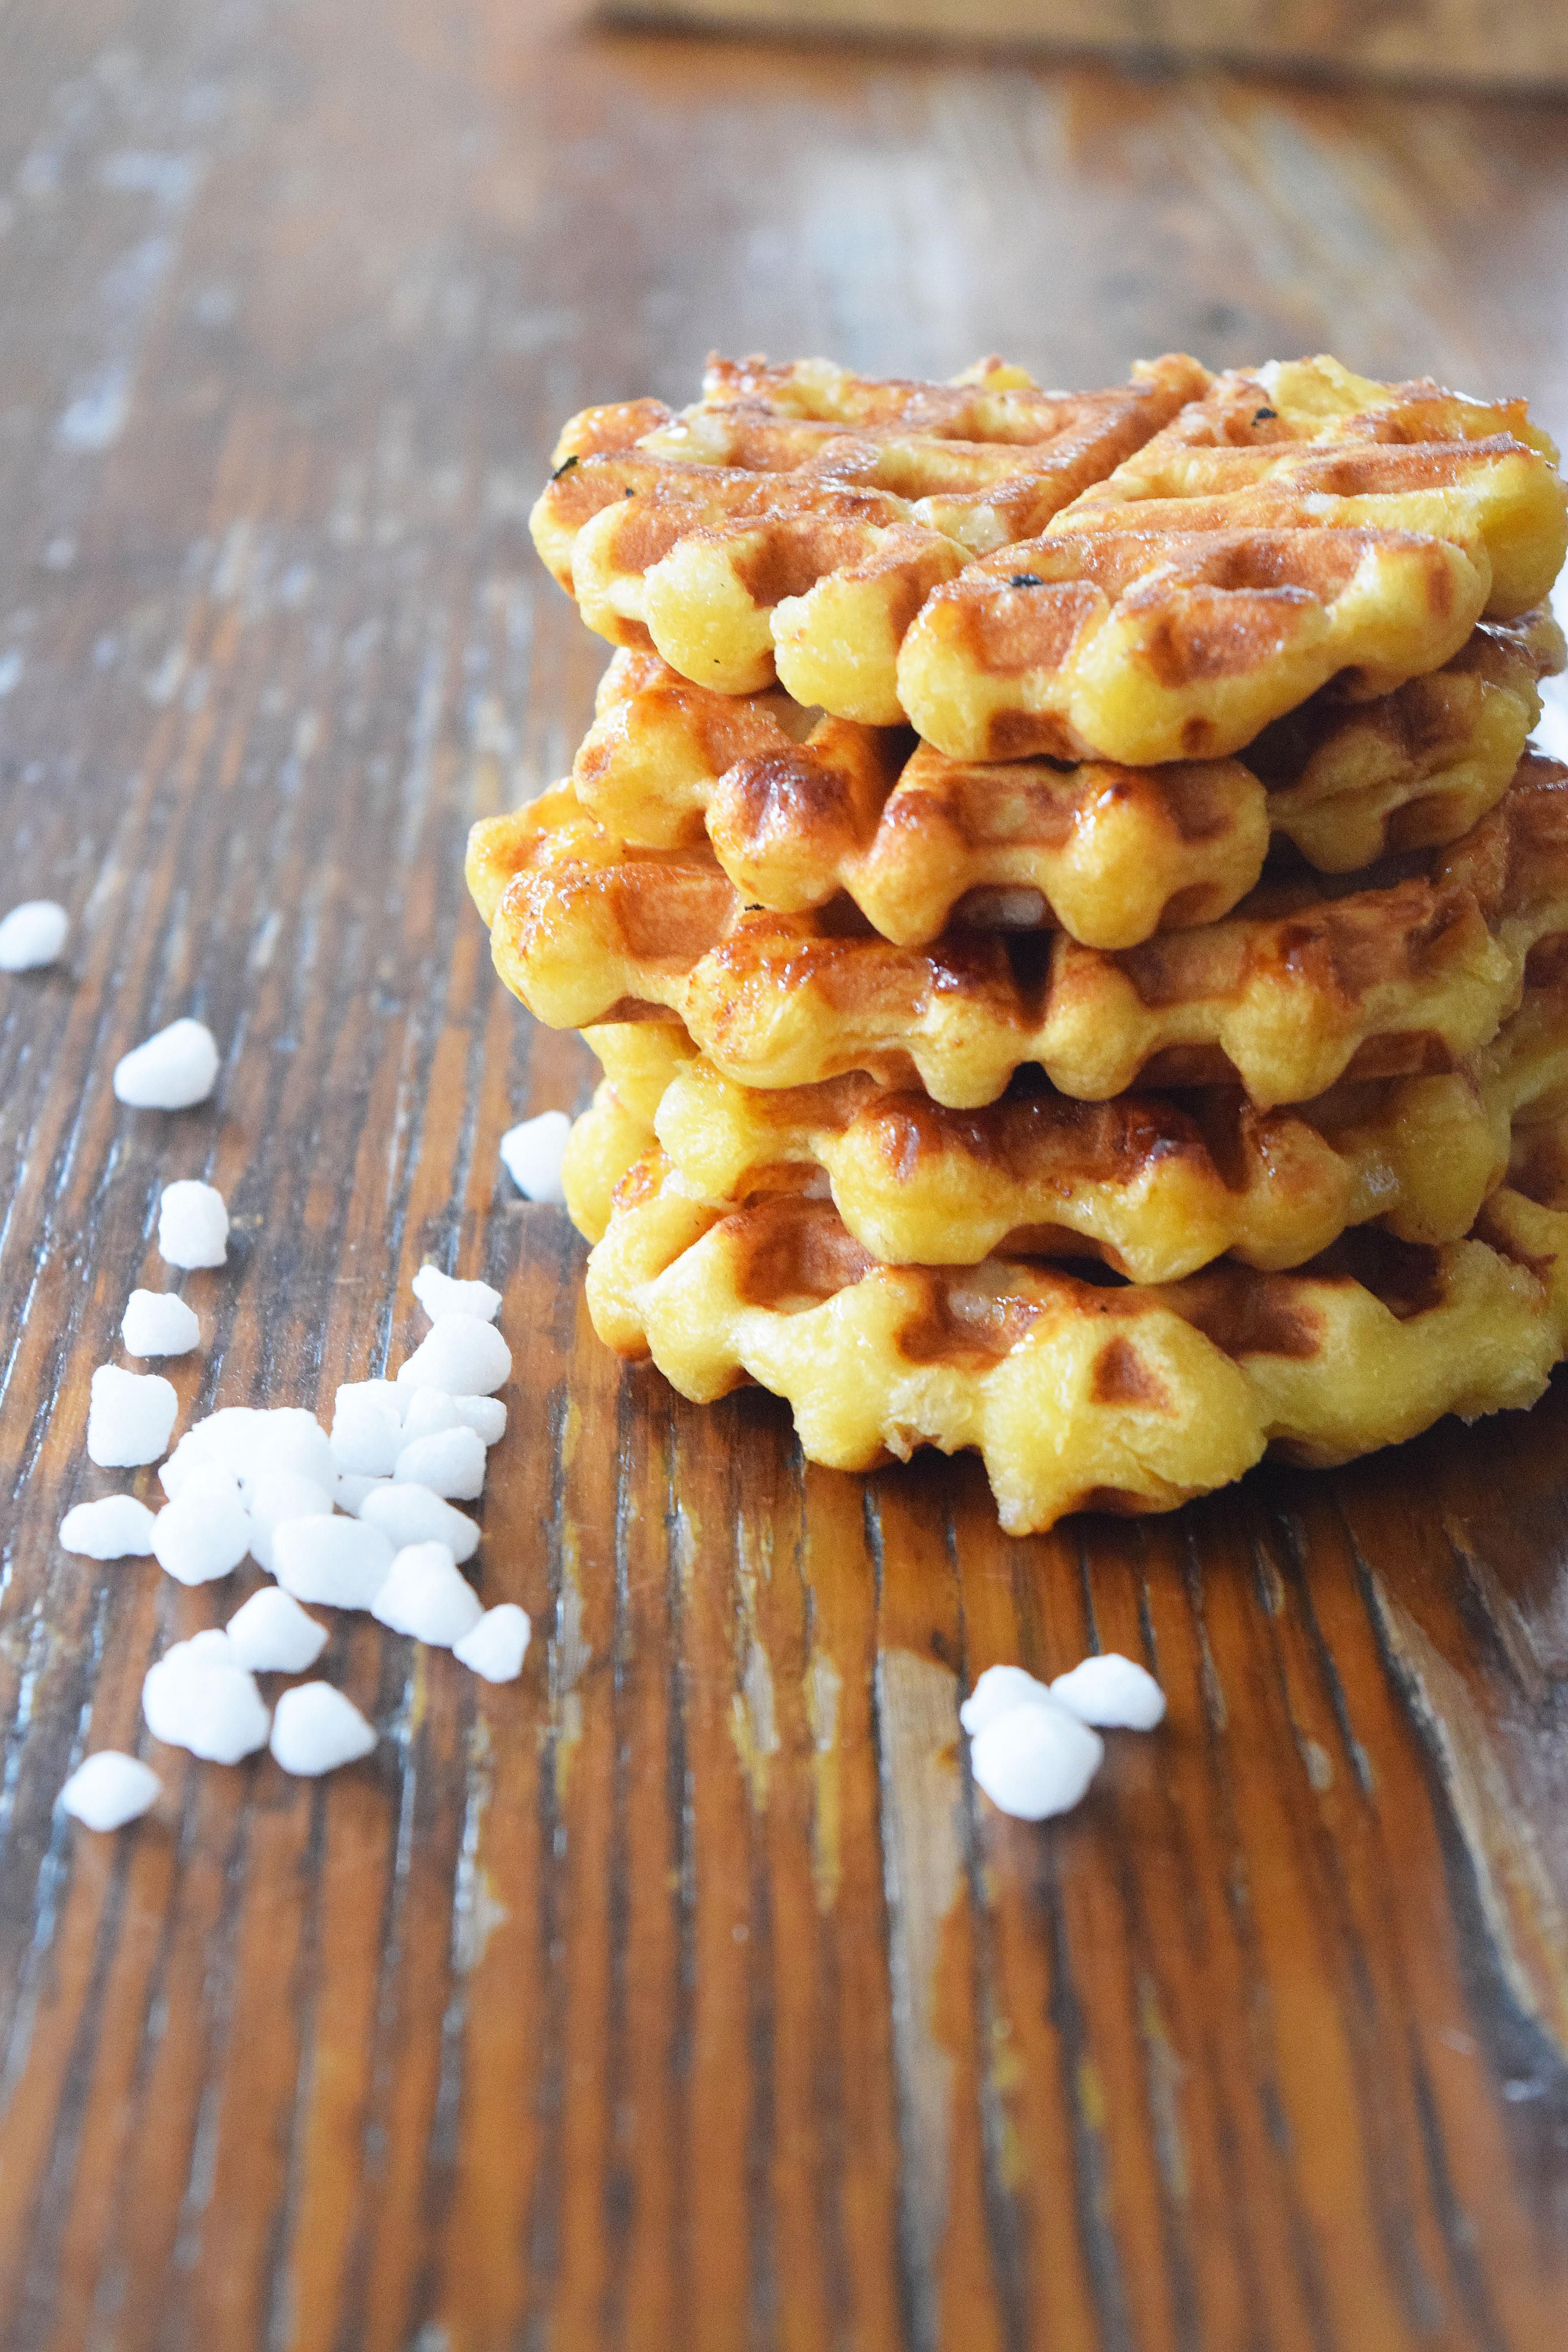 vicious biscuit bird and belgian waffle recipe